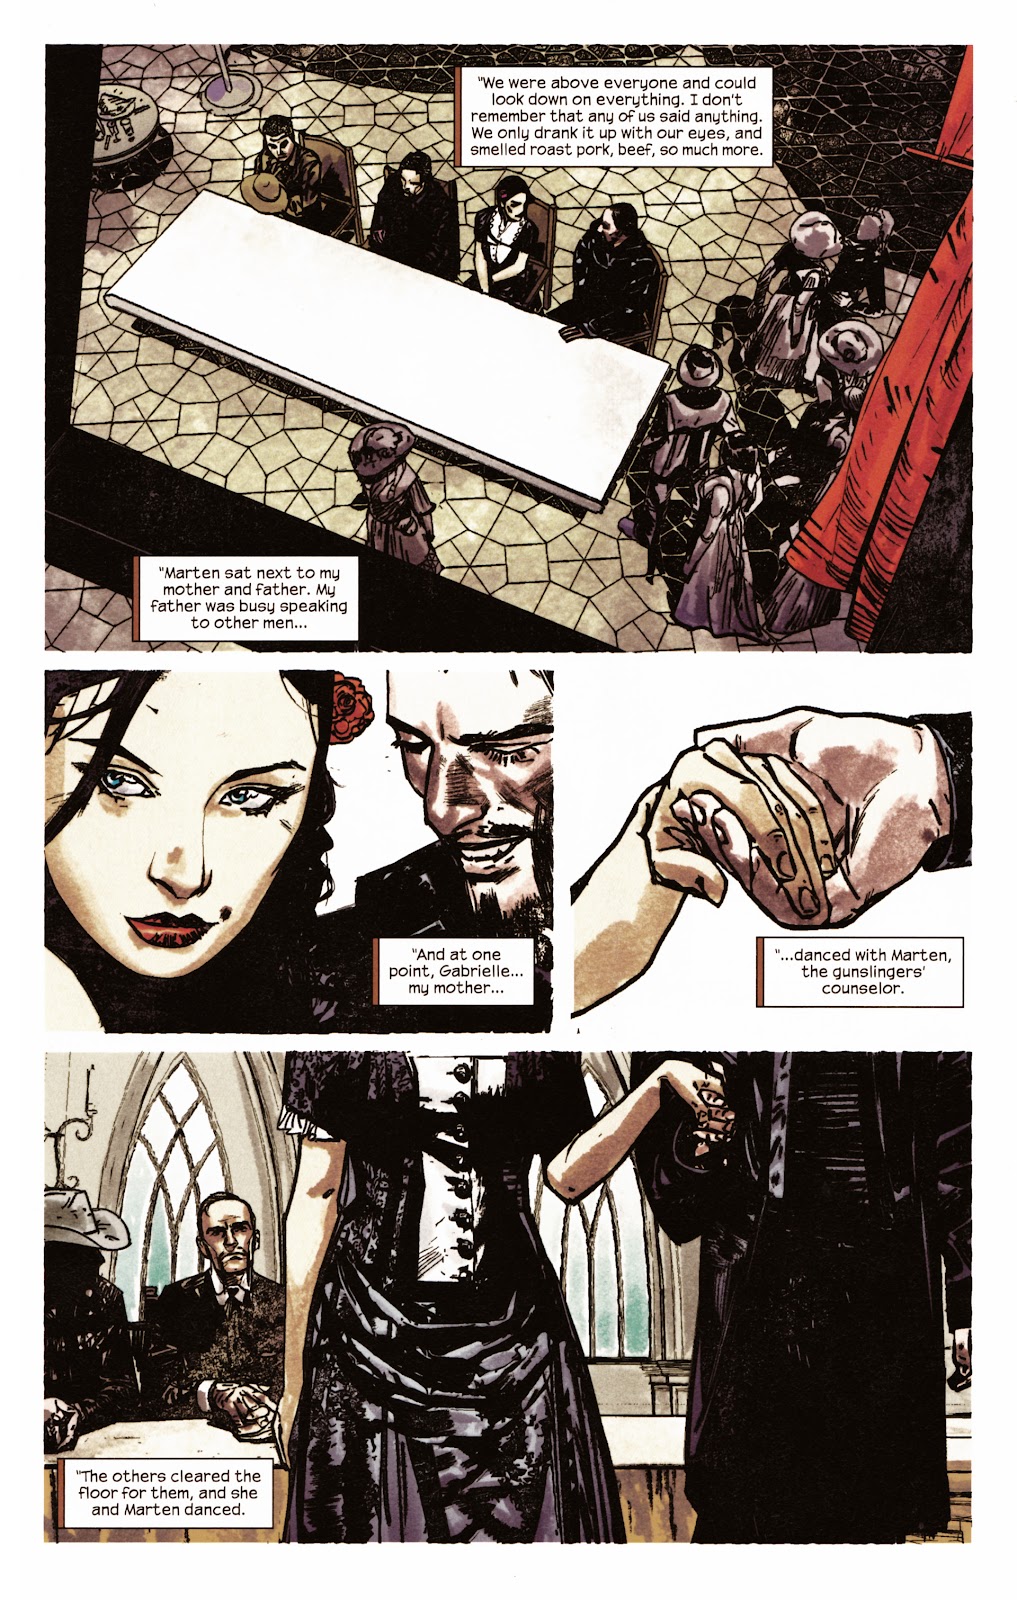 Dark Tower: The Gunslinger - The Man in Black issue 2 - Page 18